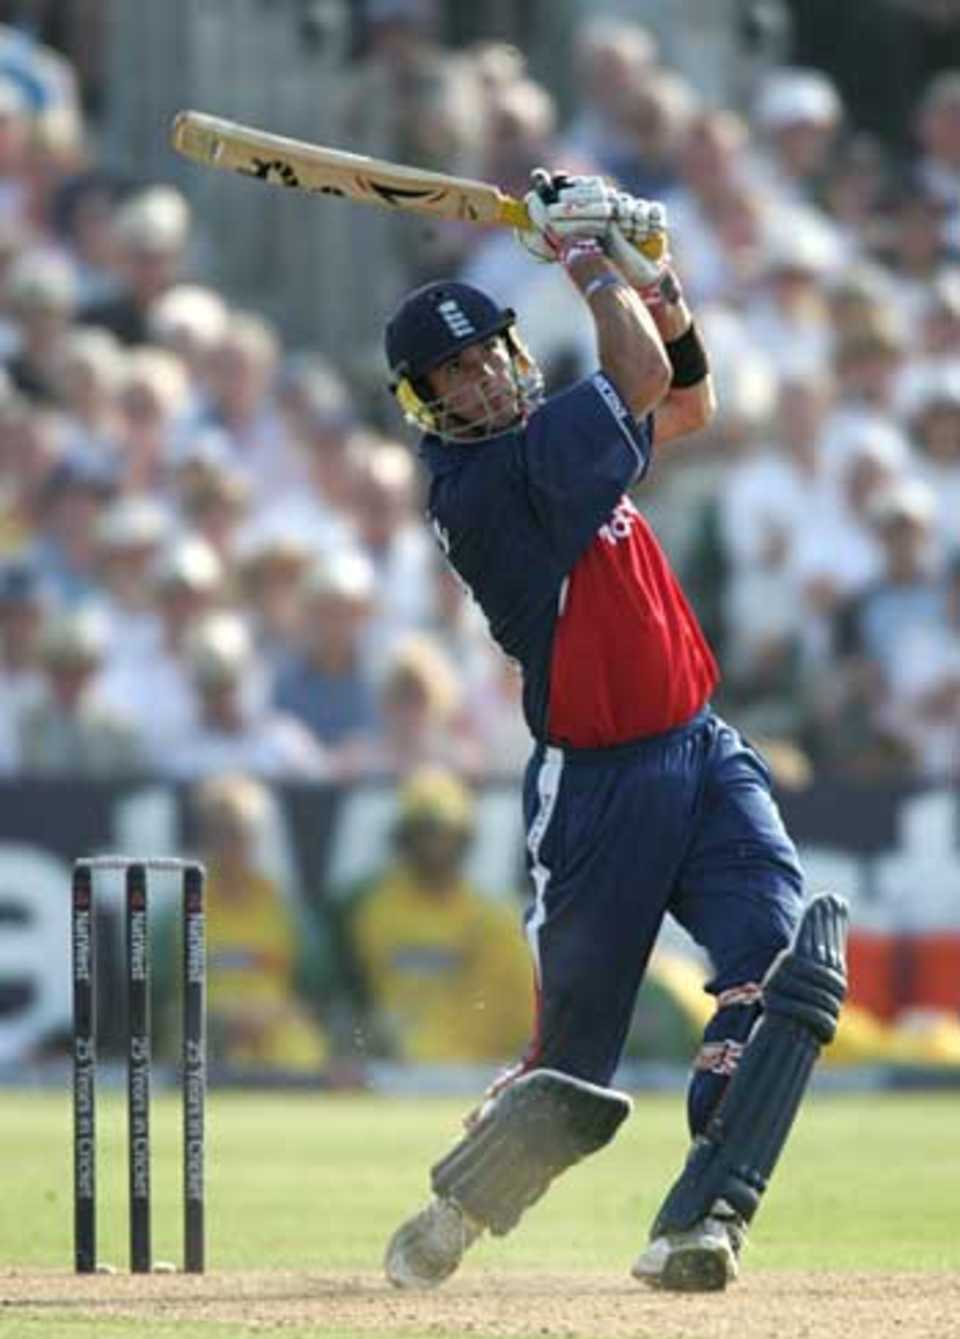 Kevin Pietersen launches another boundary